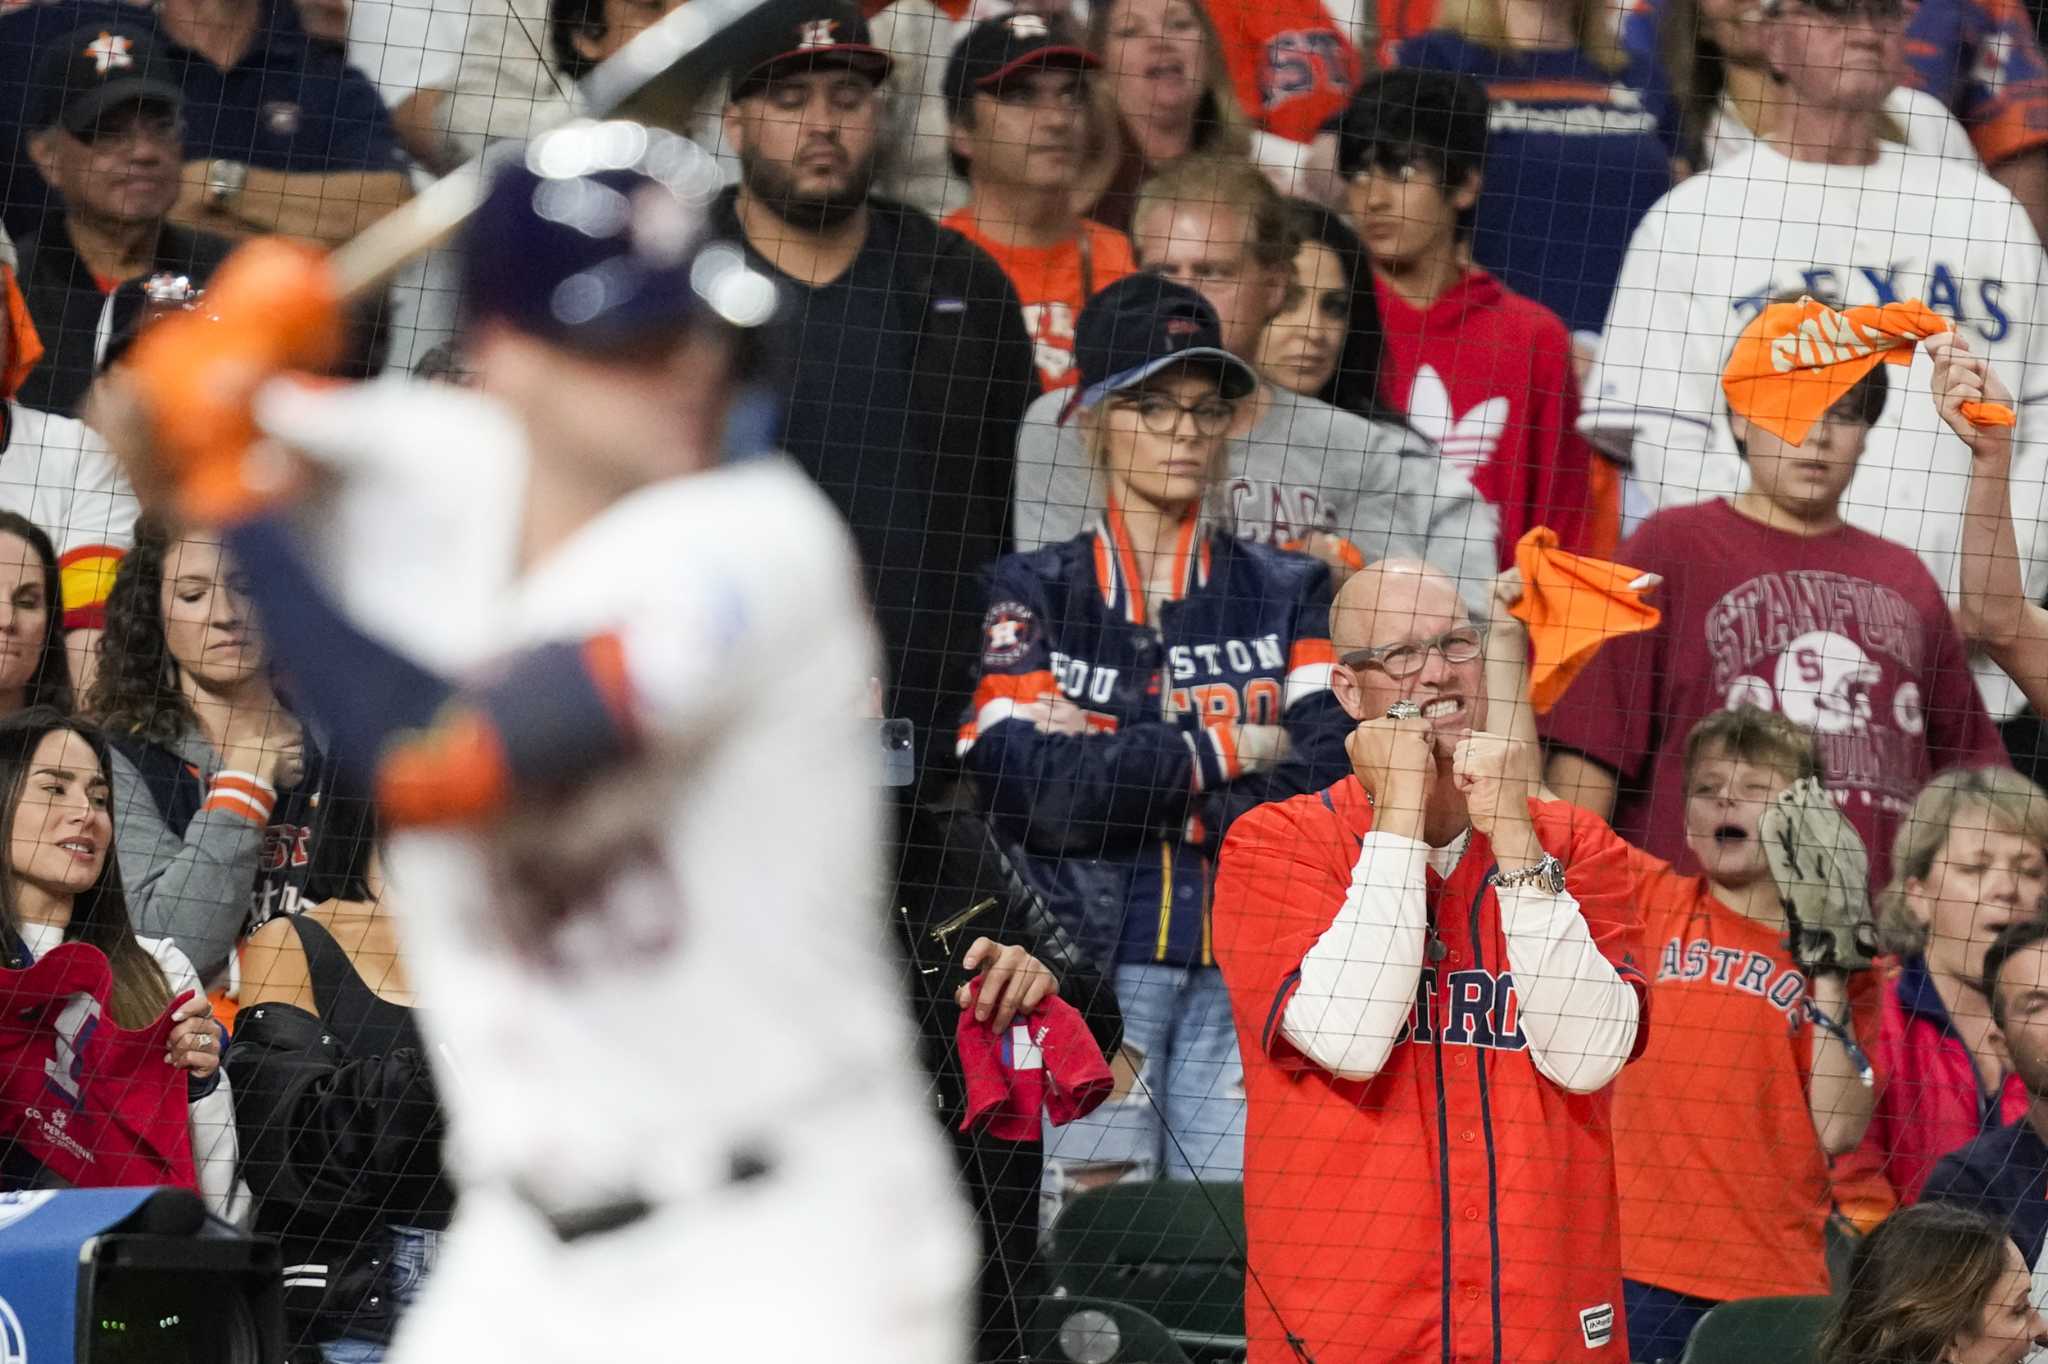 PHOTOS: Houston Astros fans gear up for Game 6 of ALCS